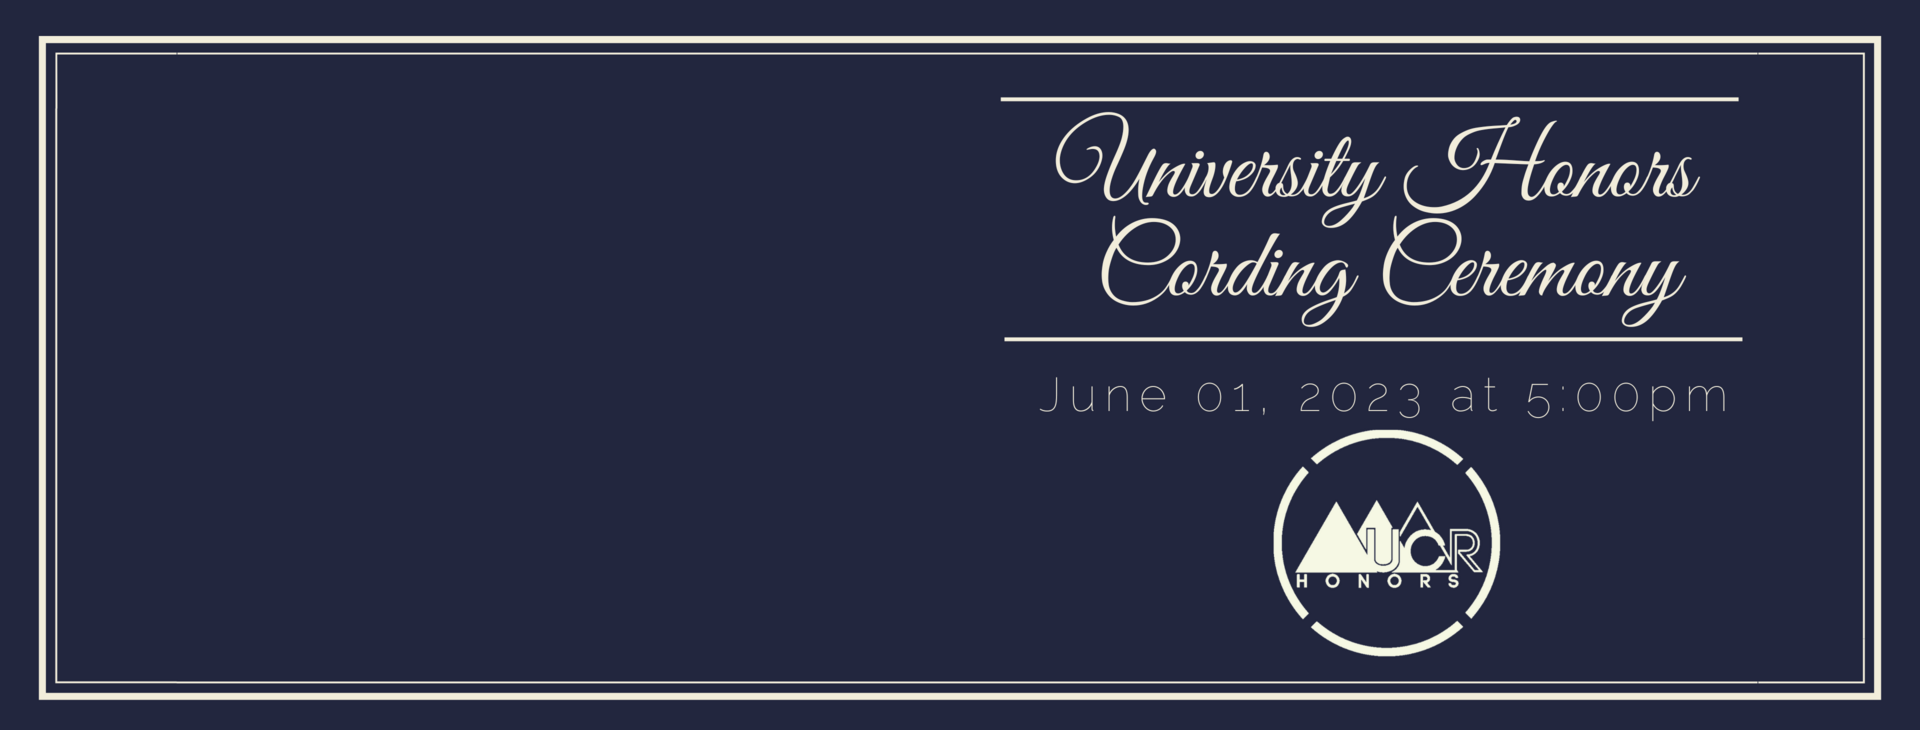 Cording Ceremony Date Announcement Banner